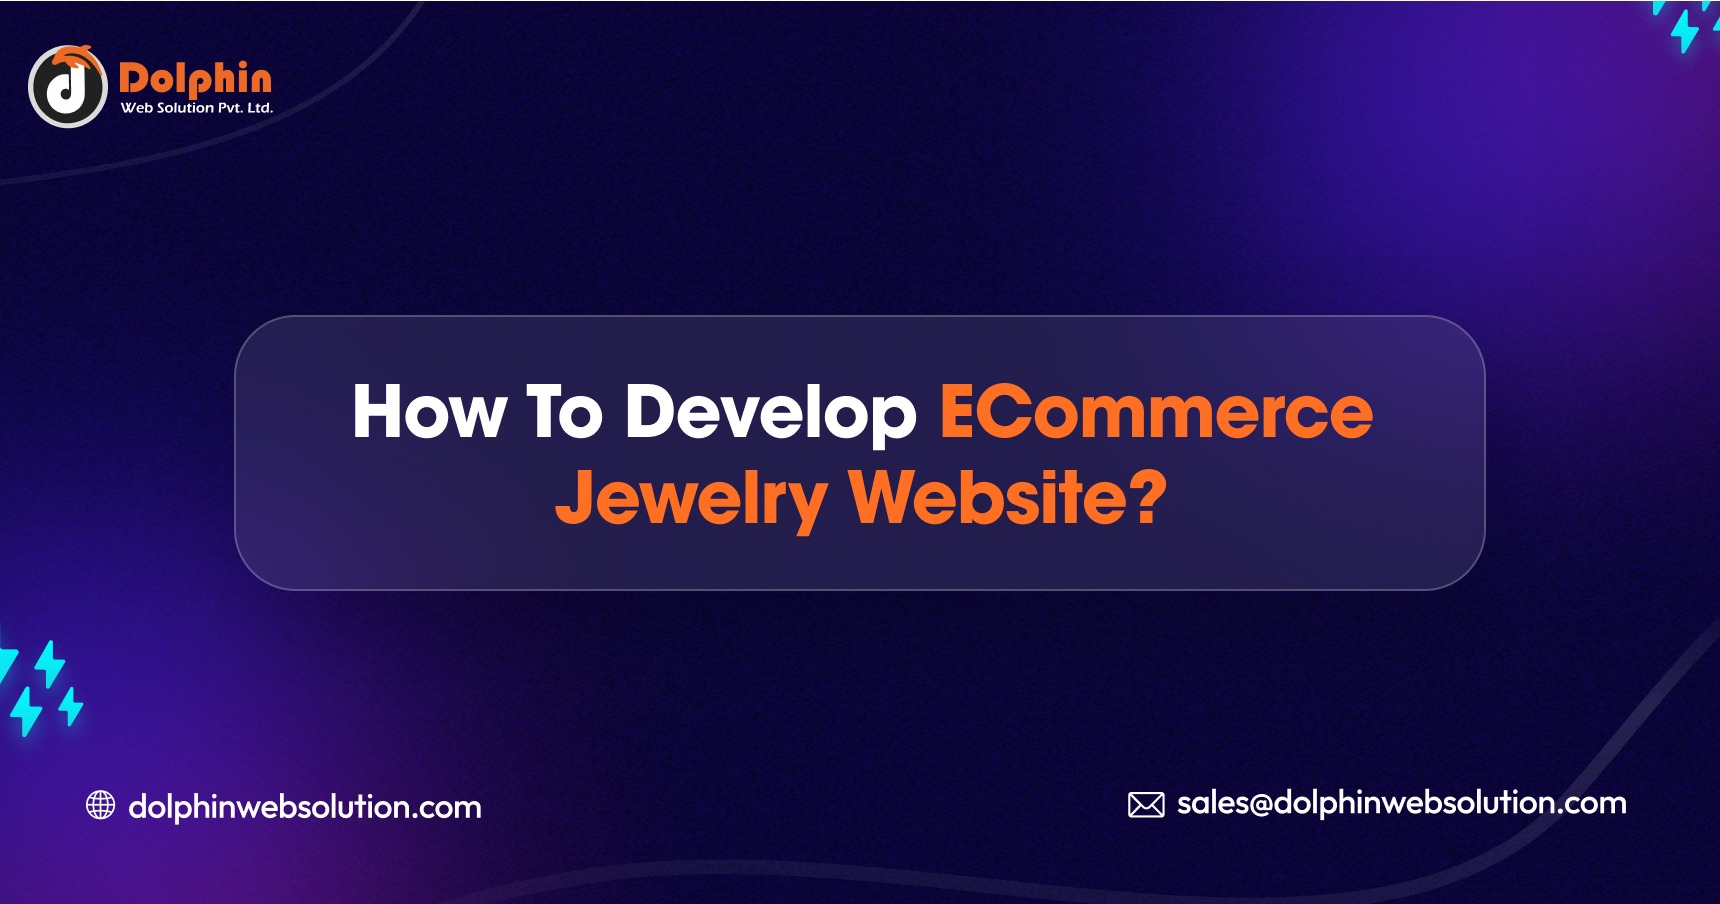 How to Develop eCommerce Jewelry Website?